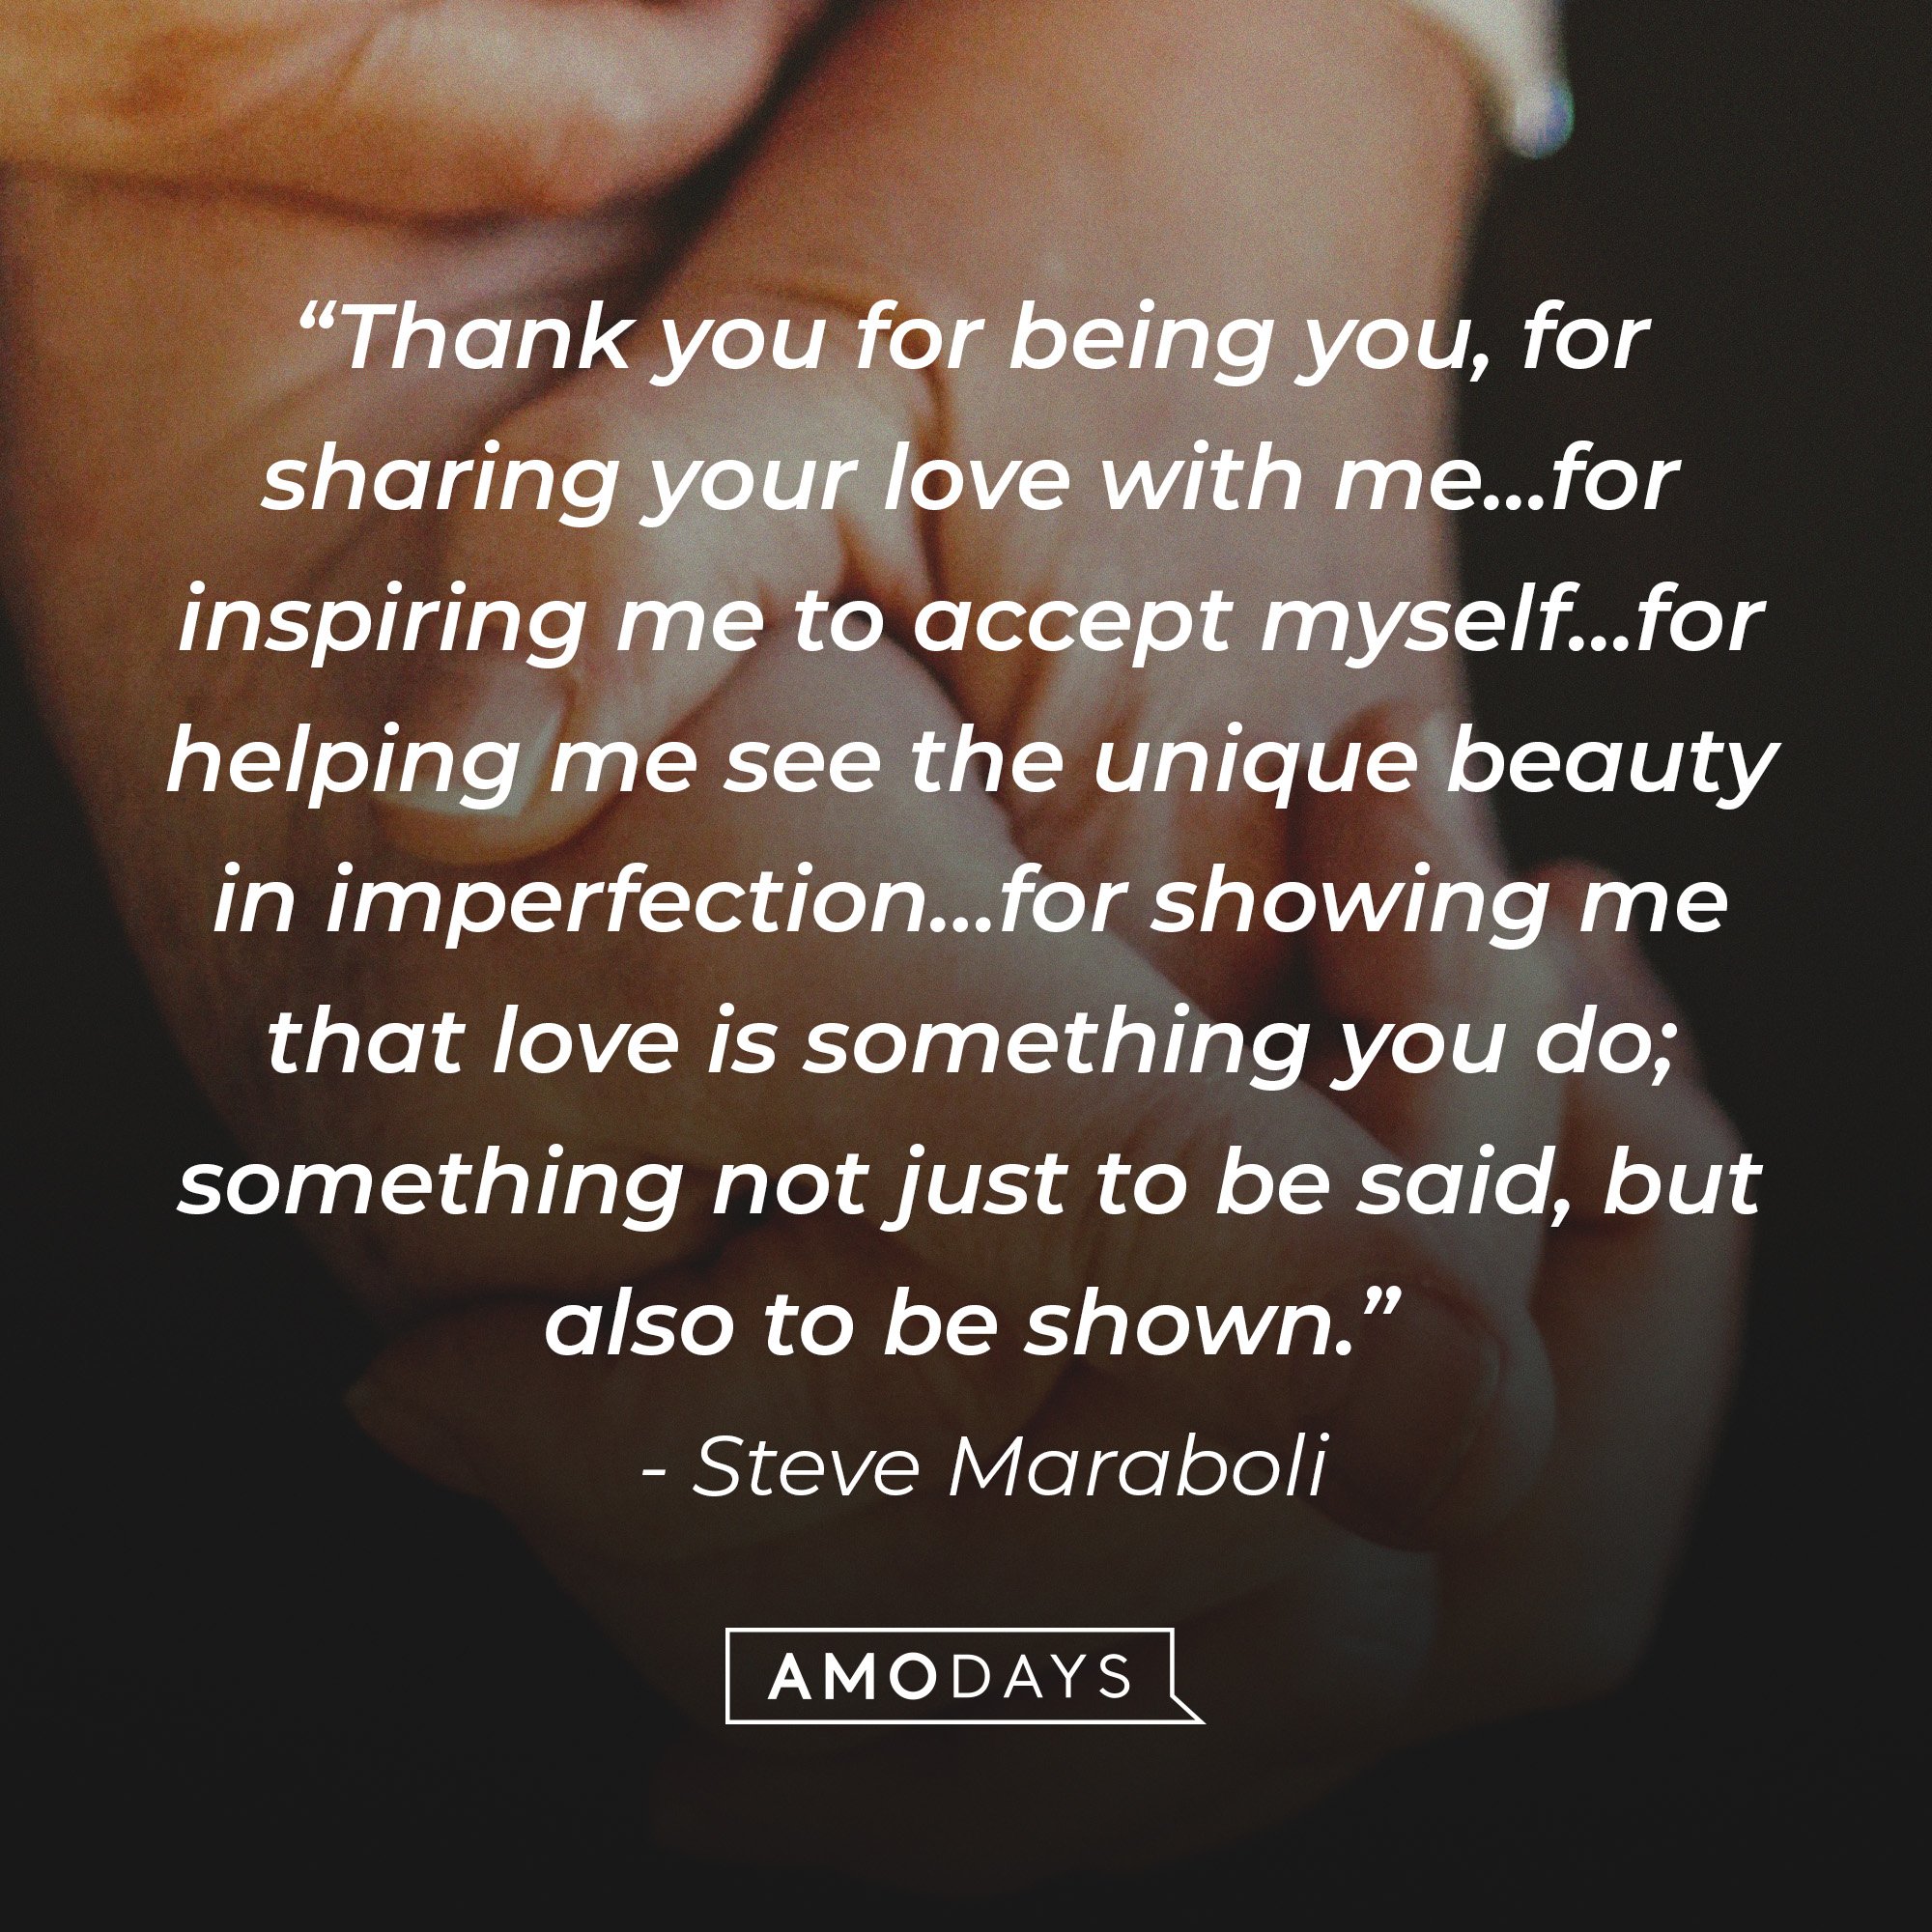 Steve Maraboli's quote: “Thank you for being you, for sharing your love with me..for inspiring me to accept myself..for helping me see the unique beauty in imperfection…for showing me that love is something you do; something not just to be said, but also to be shown.” | Image: AmoDays